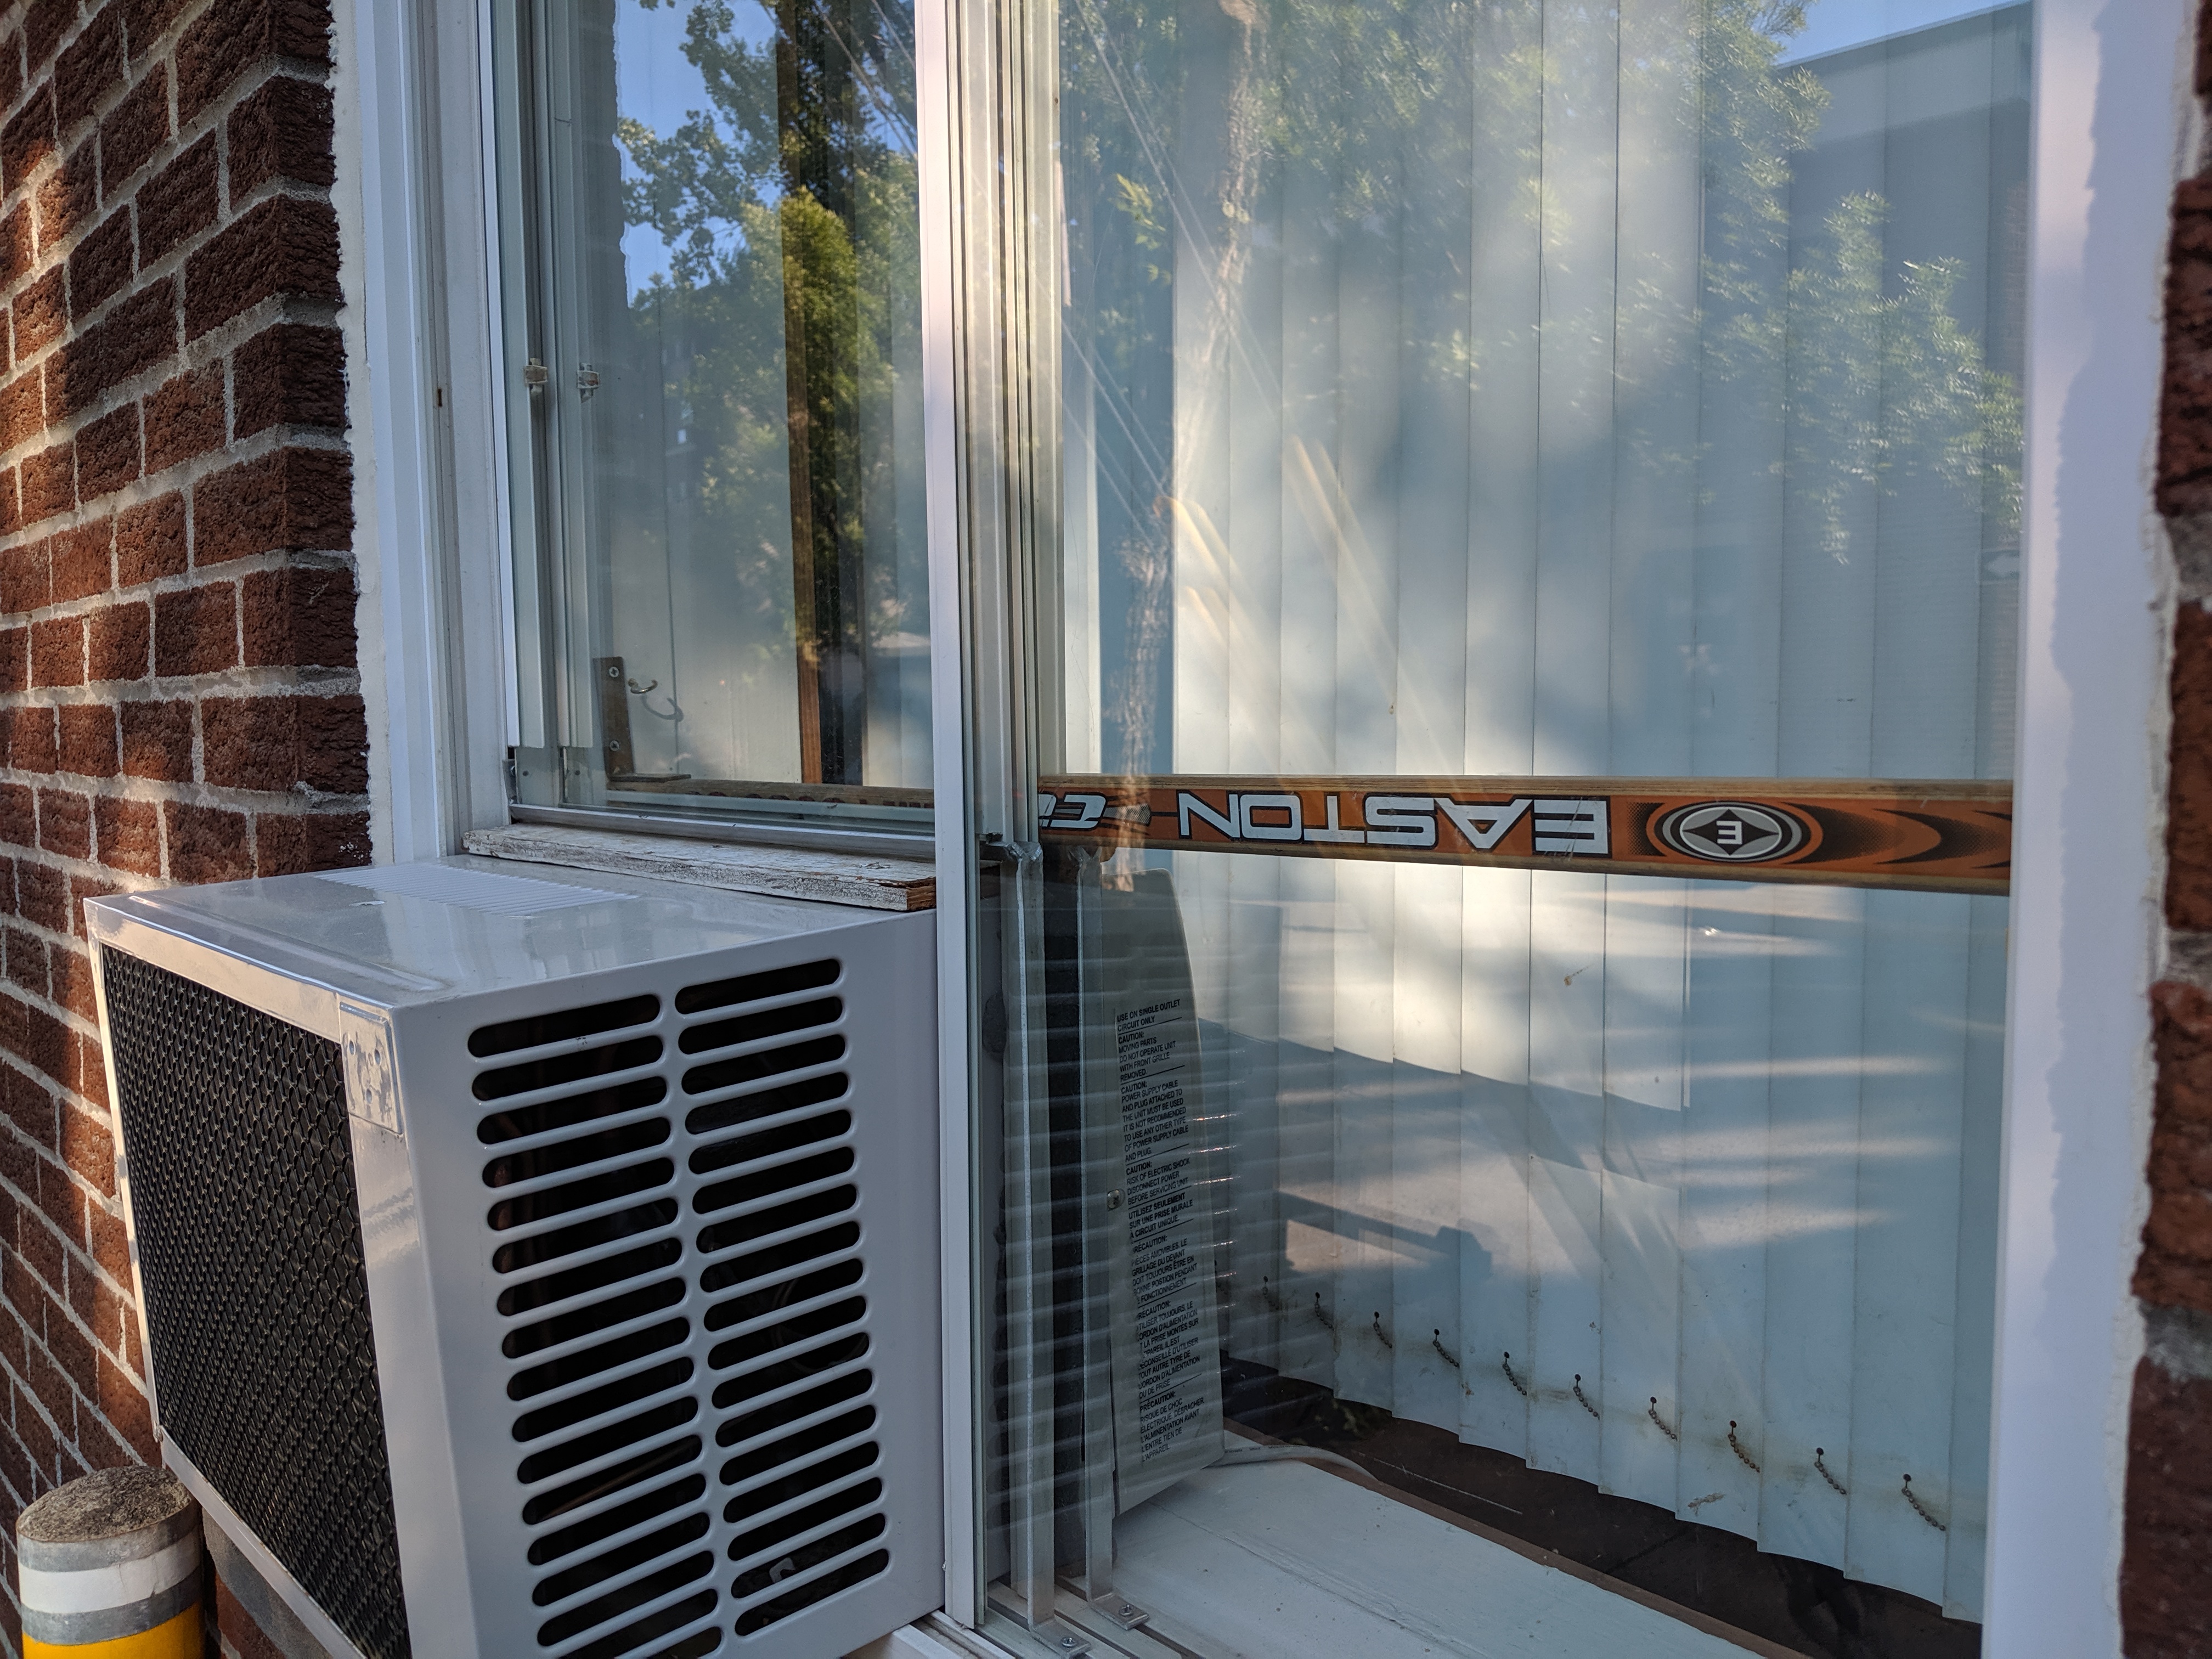 Hockey stick used as security bar in window with air conditioner